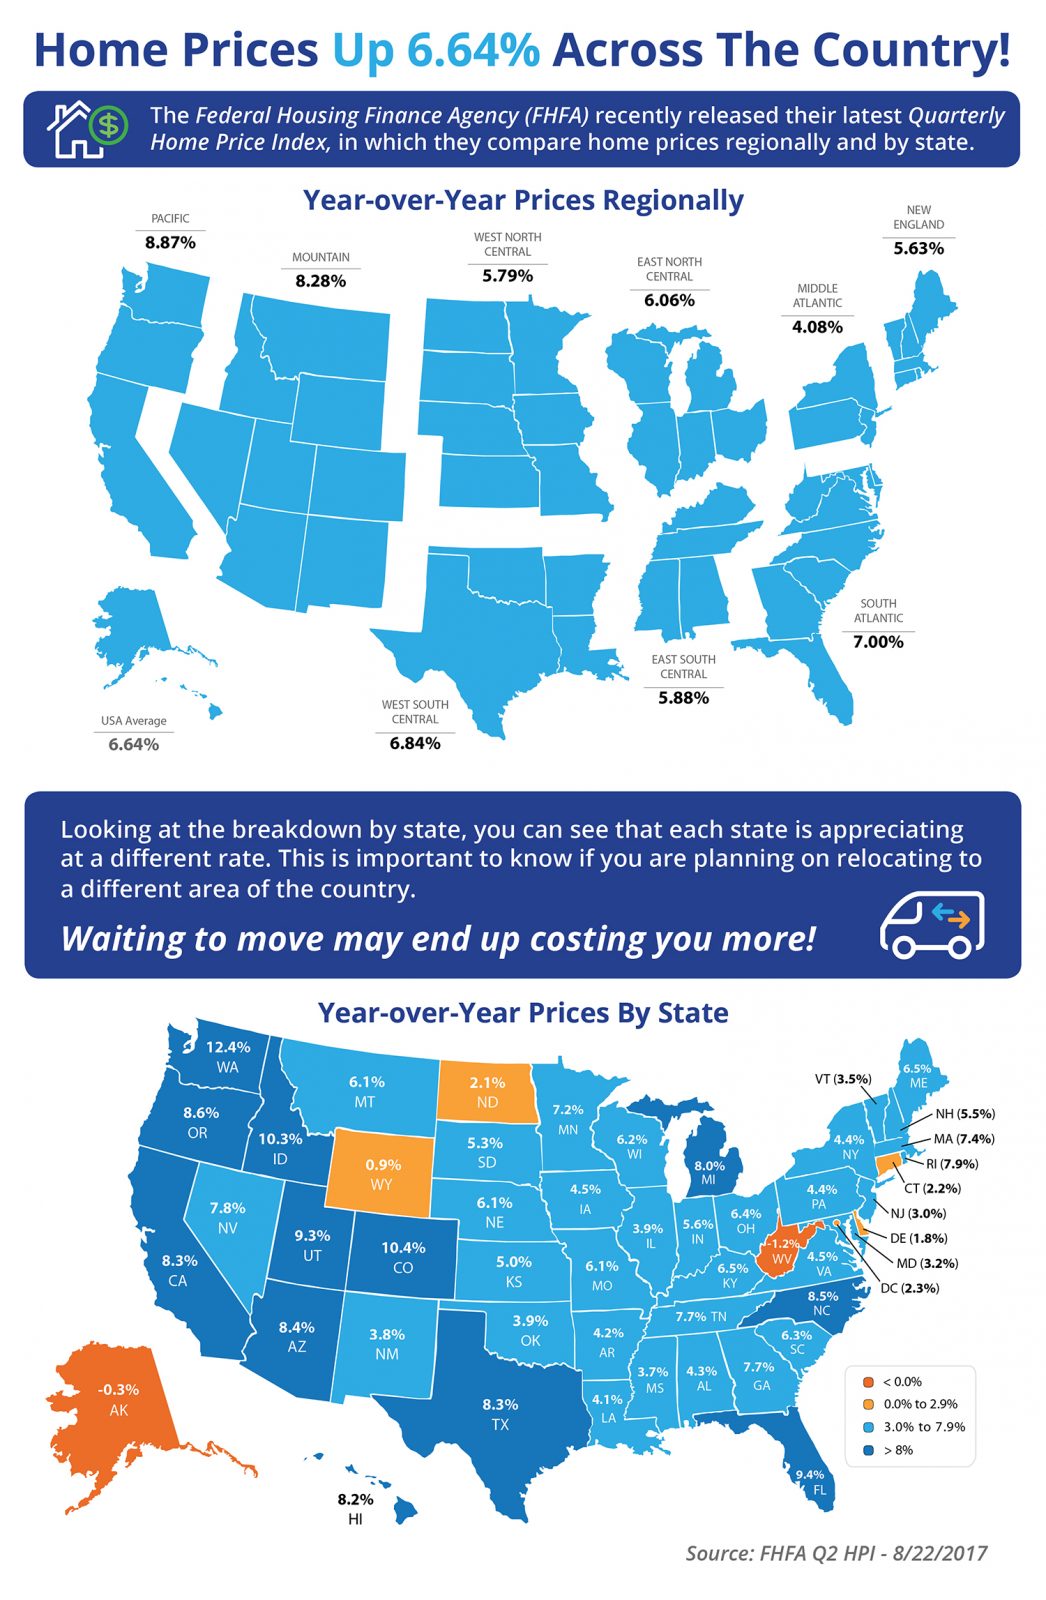 Home Prices Up 6.64% Across the Country! [INFOGRAPHIC] | MyKCM